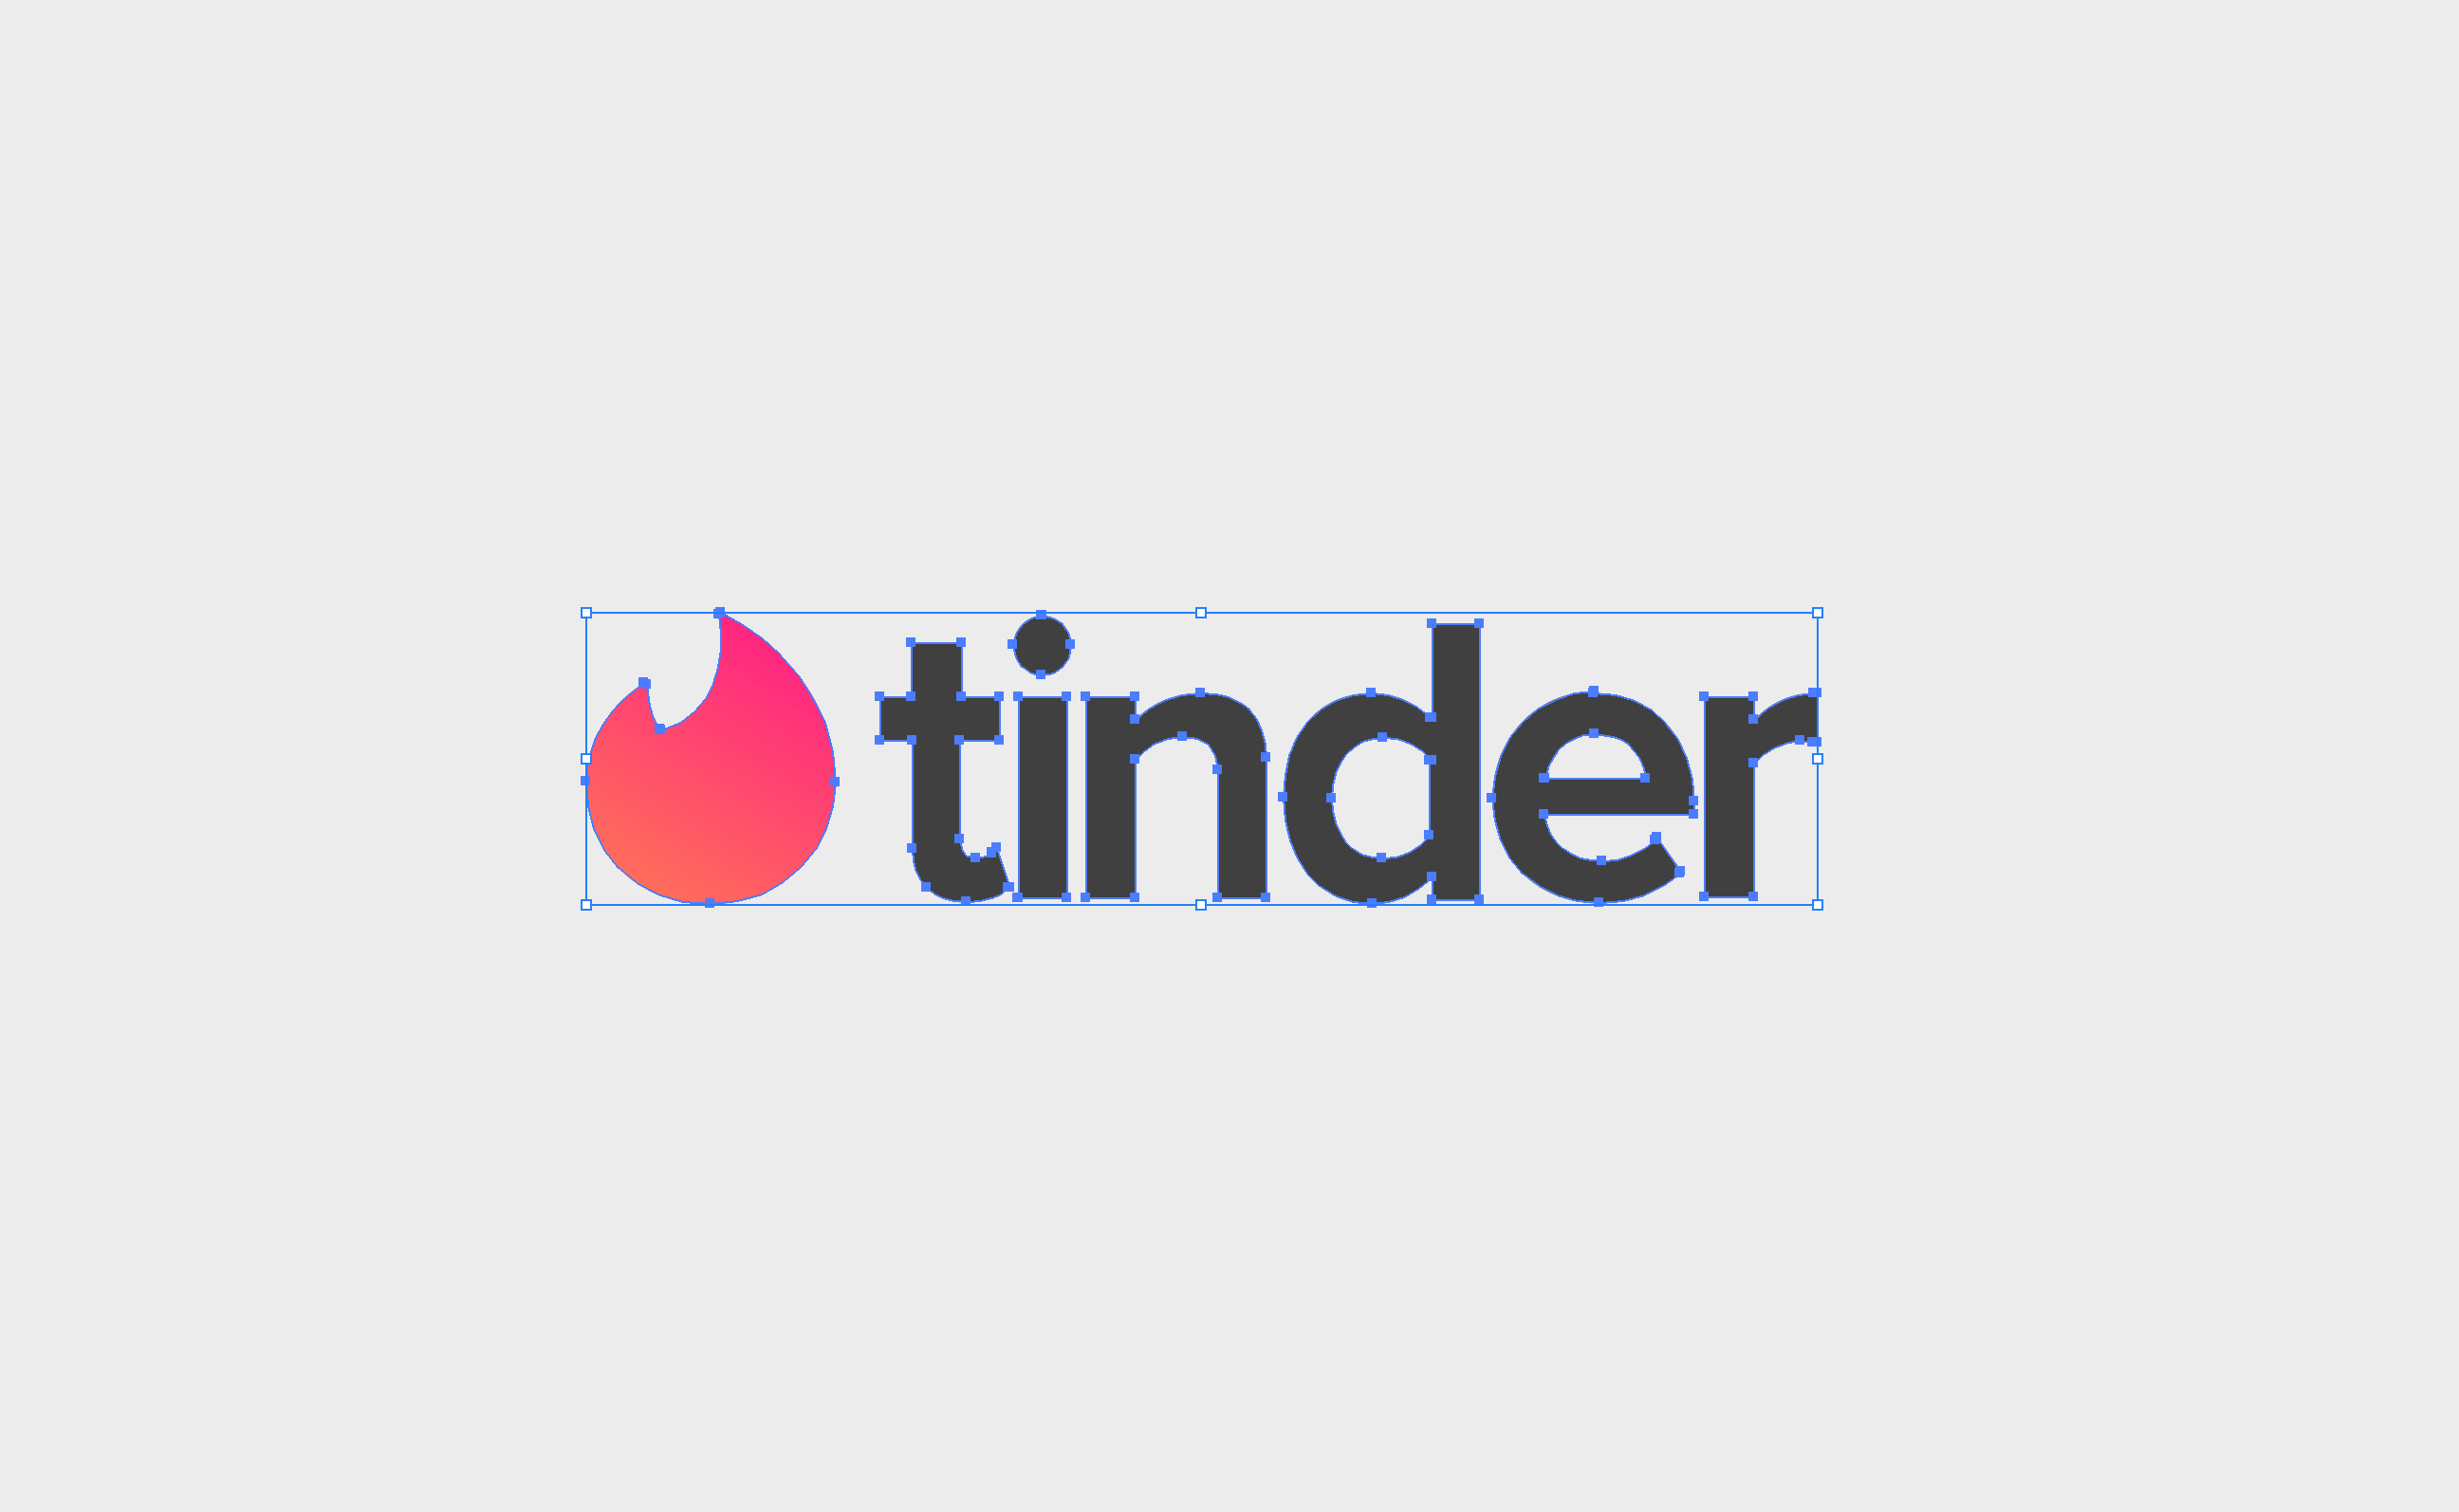 Match Logo - Don't be tender with the tinder logo! - Graphéine